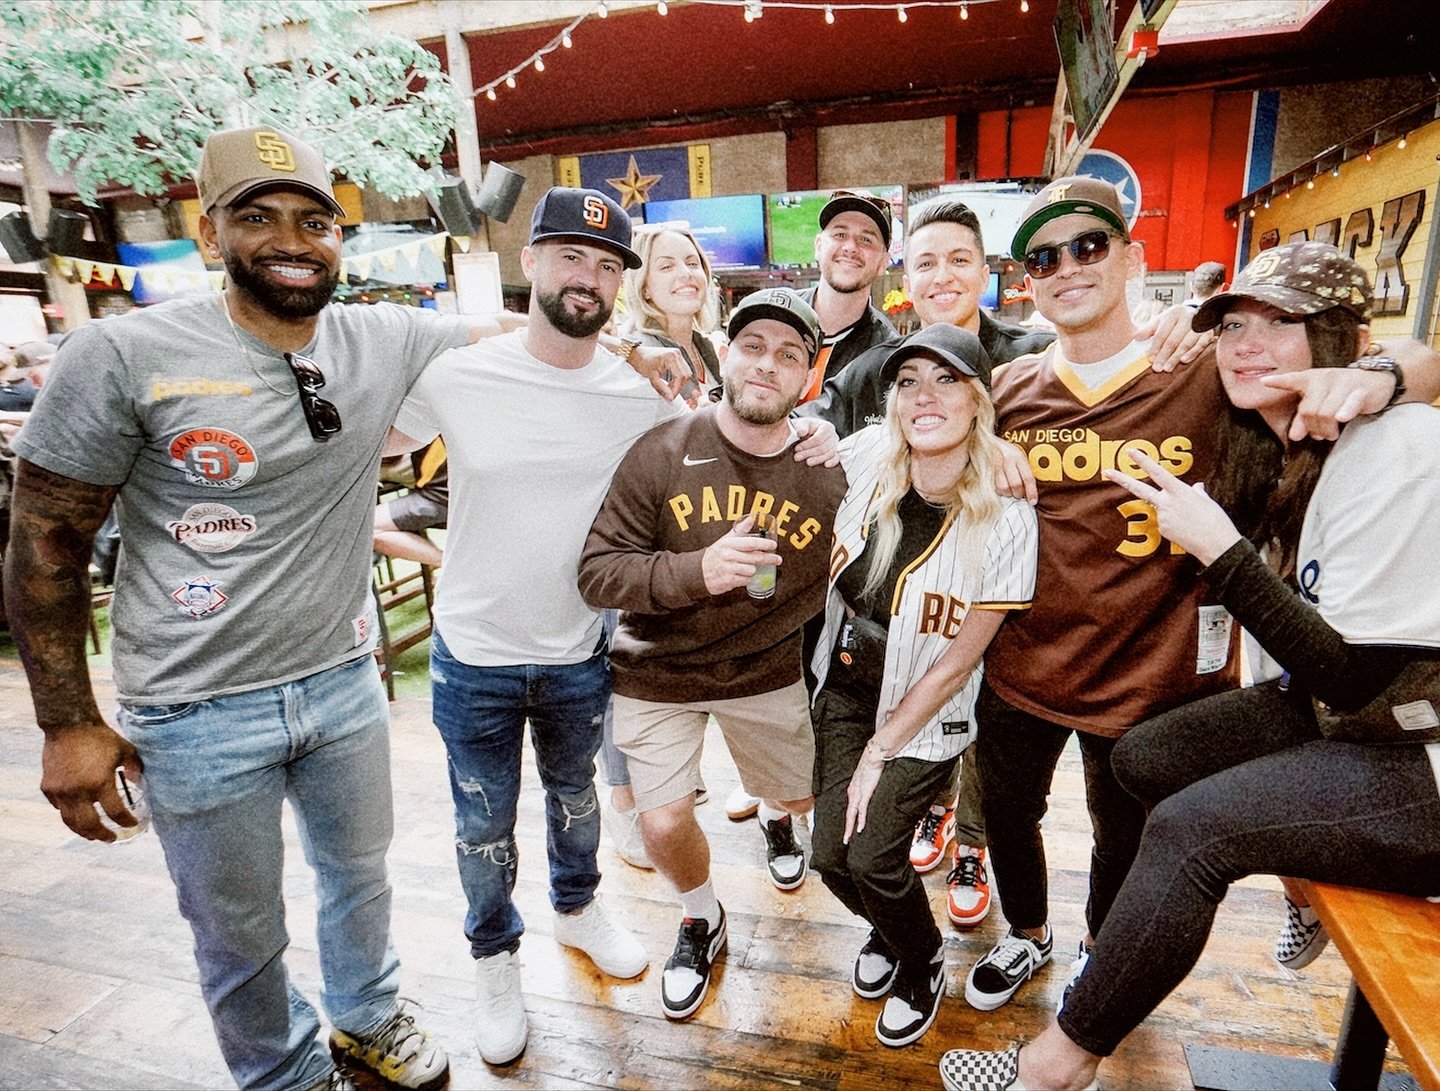 Big PADRES energy! Come pregame with us all weekend long!